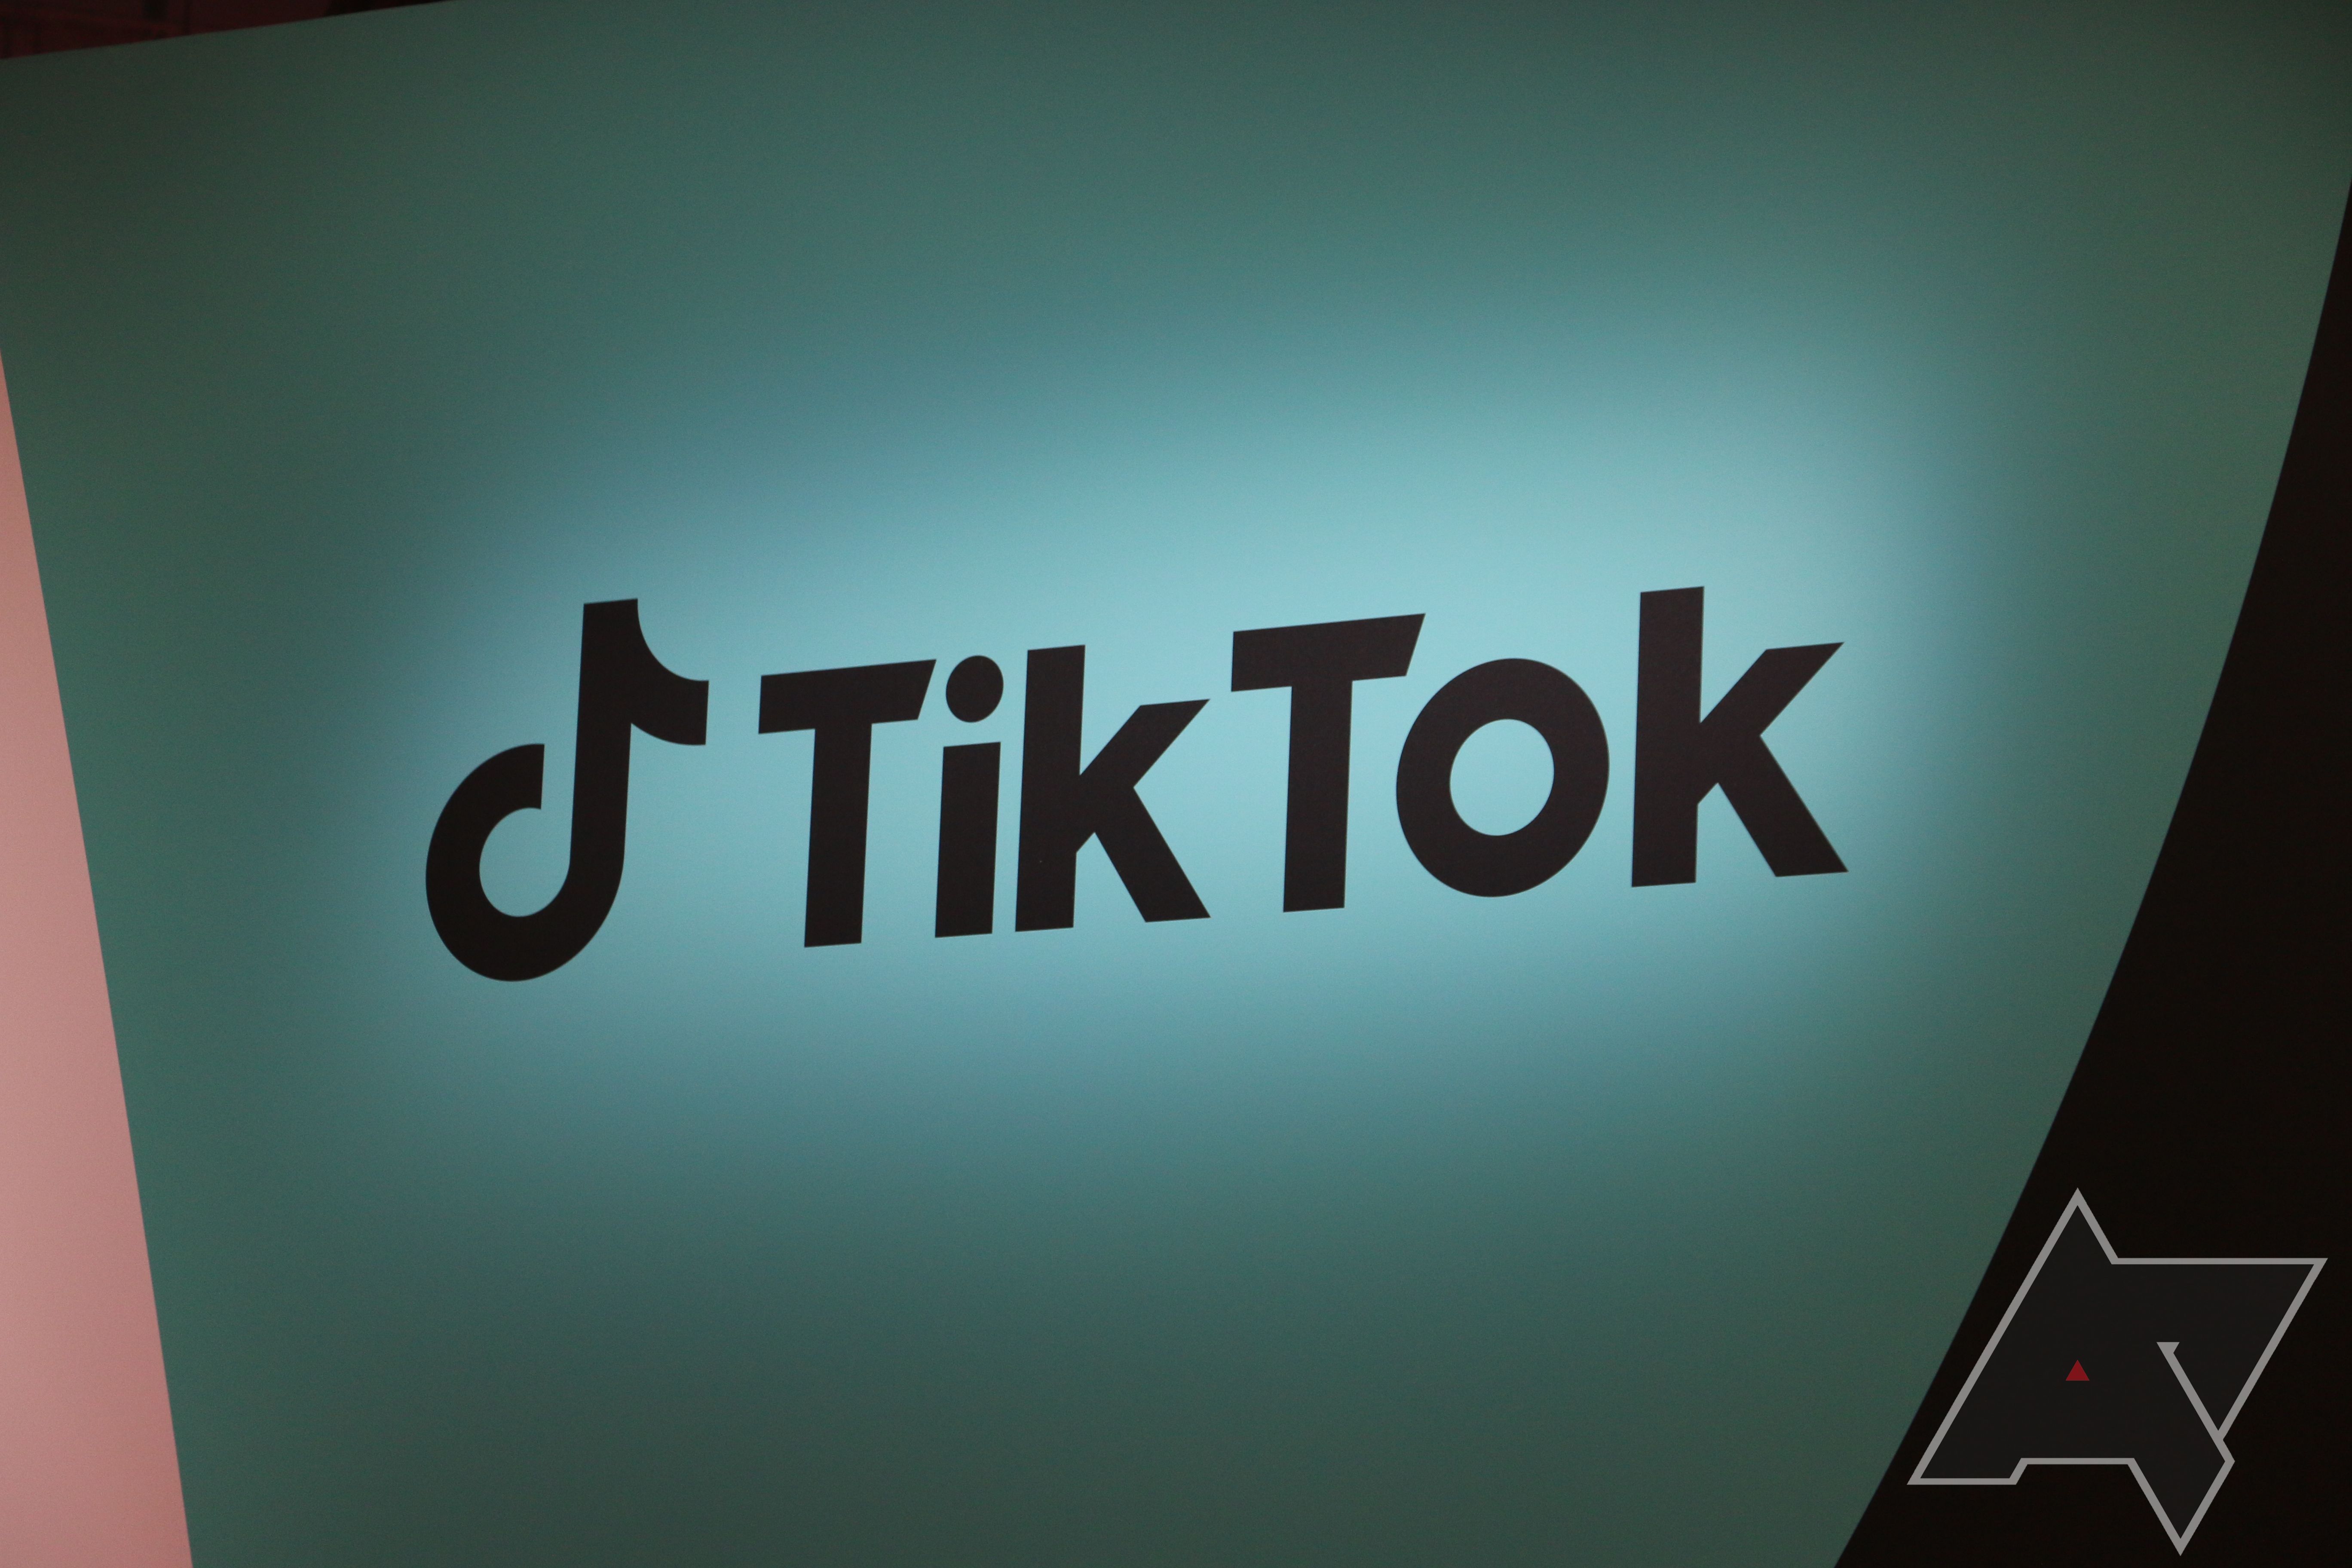 TikTok briefly allowed users to create controversial AI-generated videos